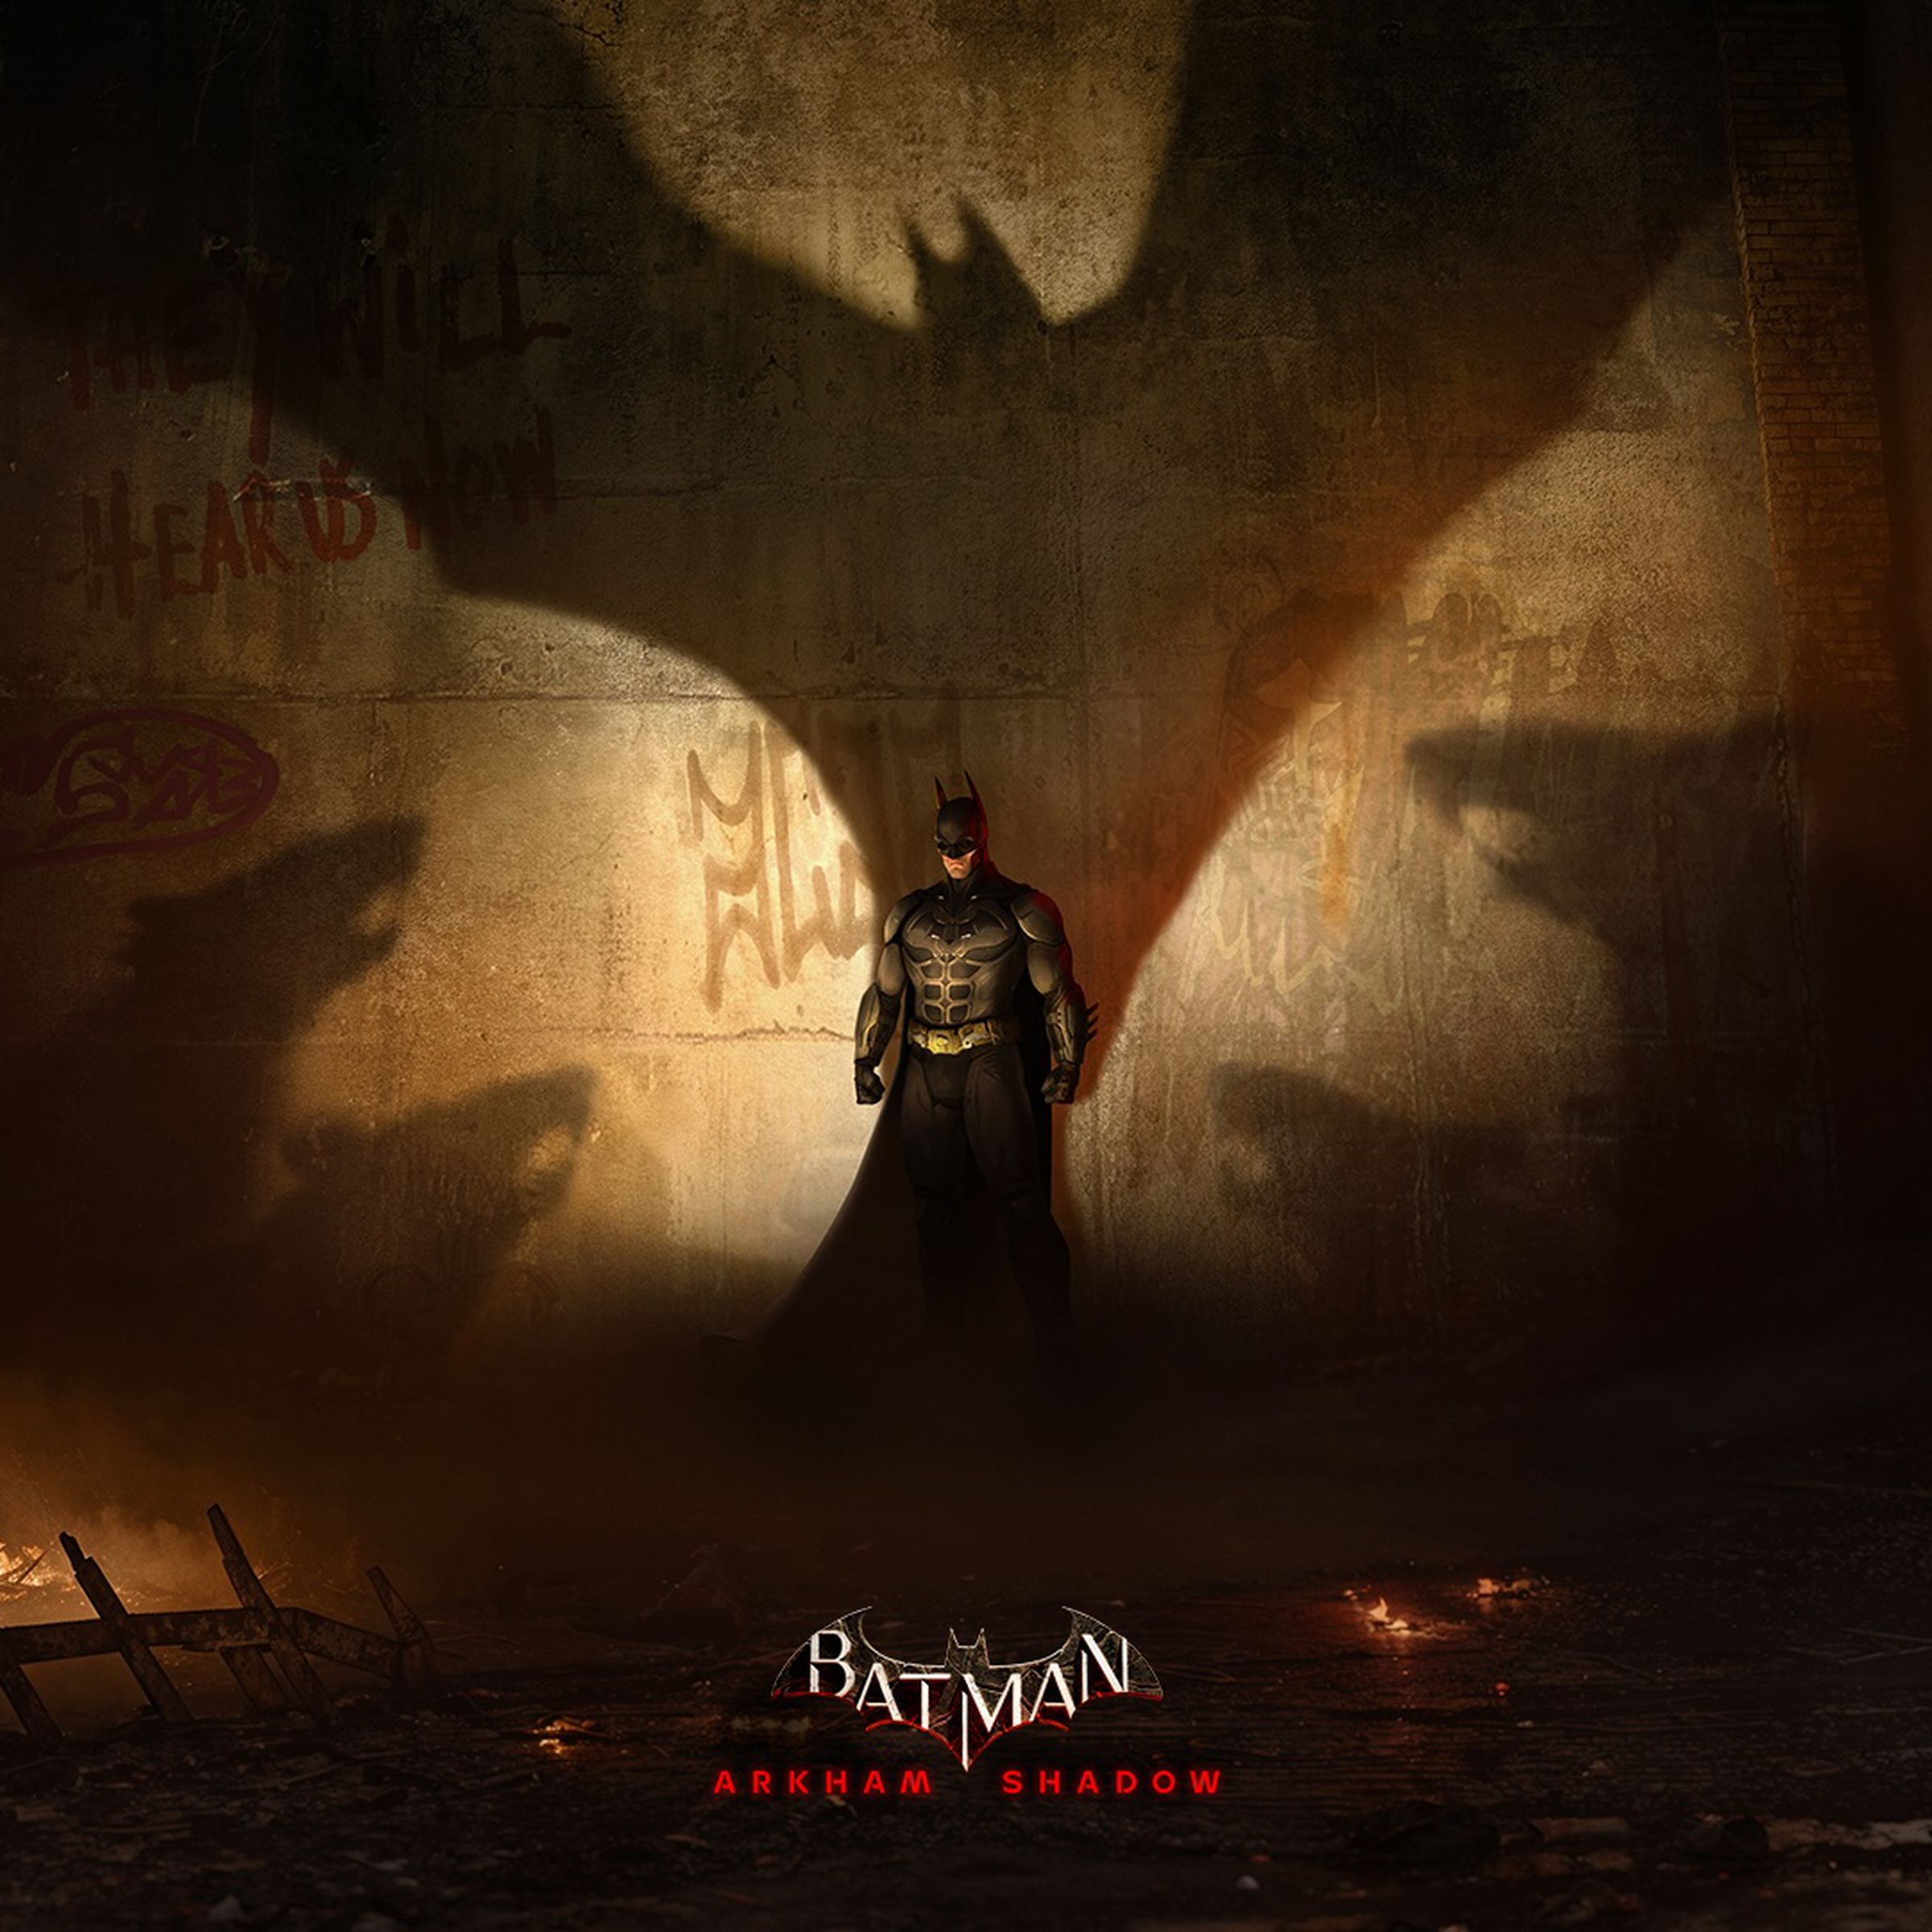 Key art from Batman: Arkham Shadow featuring Batman with a large shadow cast behind him that looks like a bat with extended wings over the text Batman: Arkham Shadow.